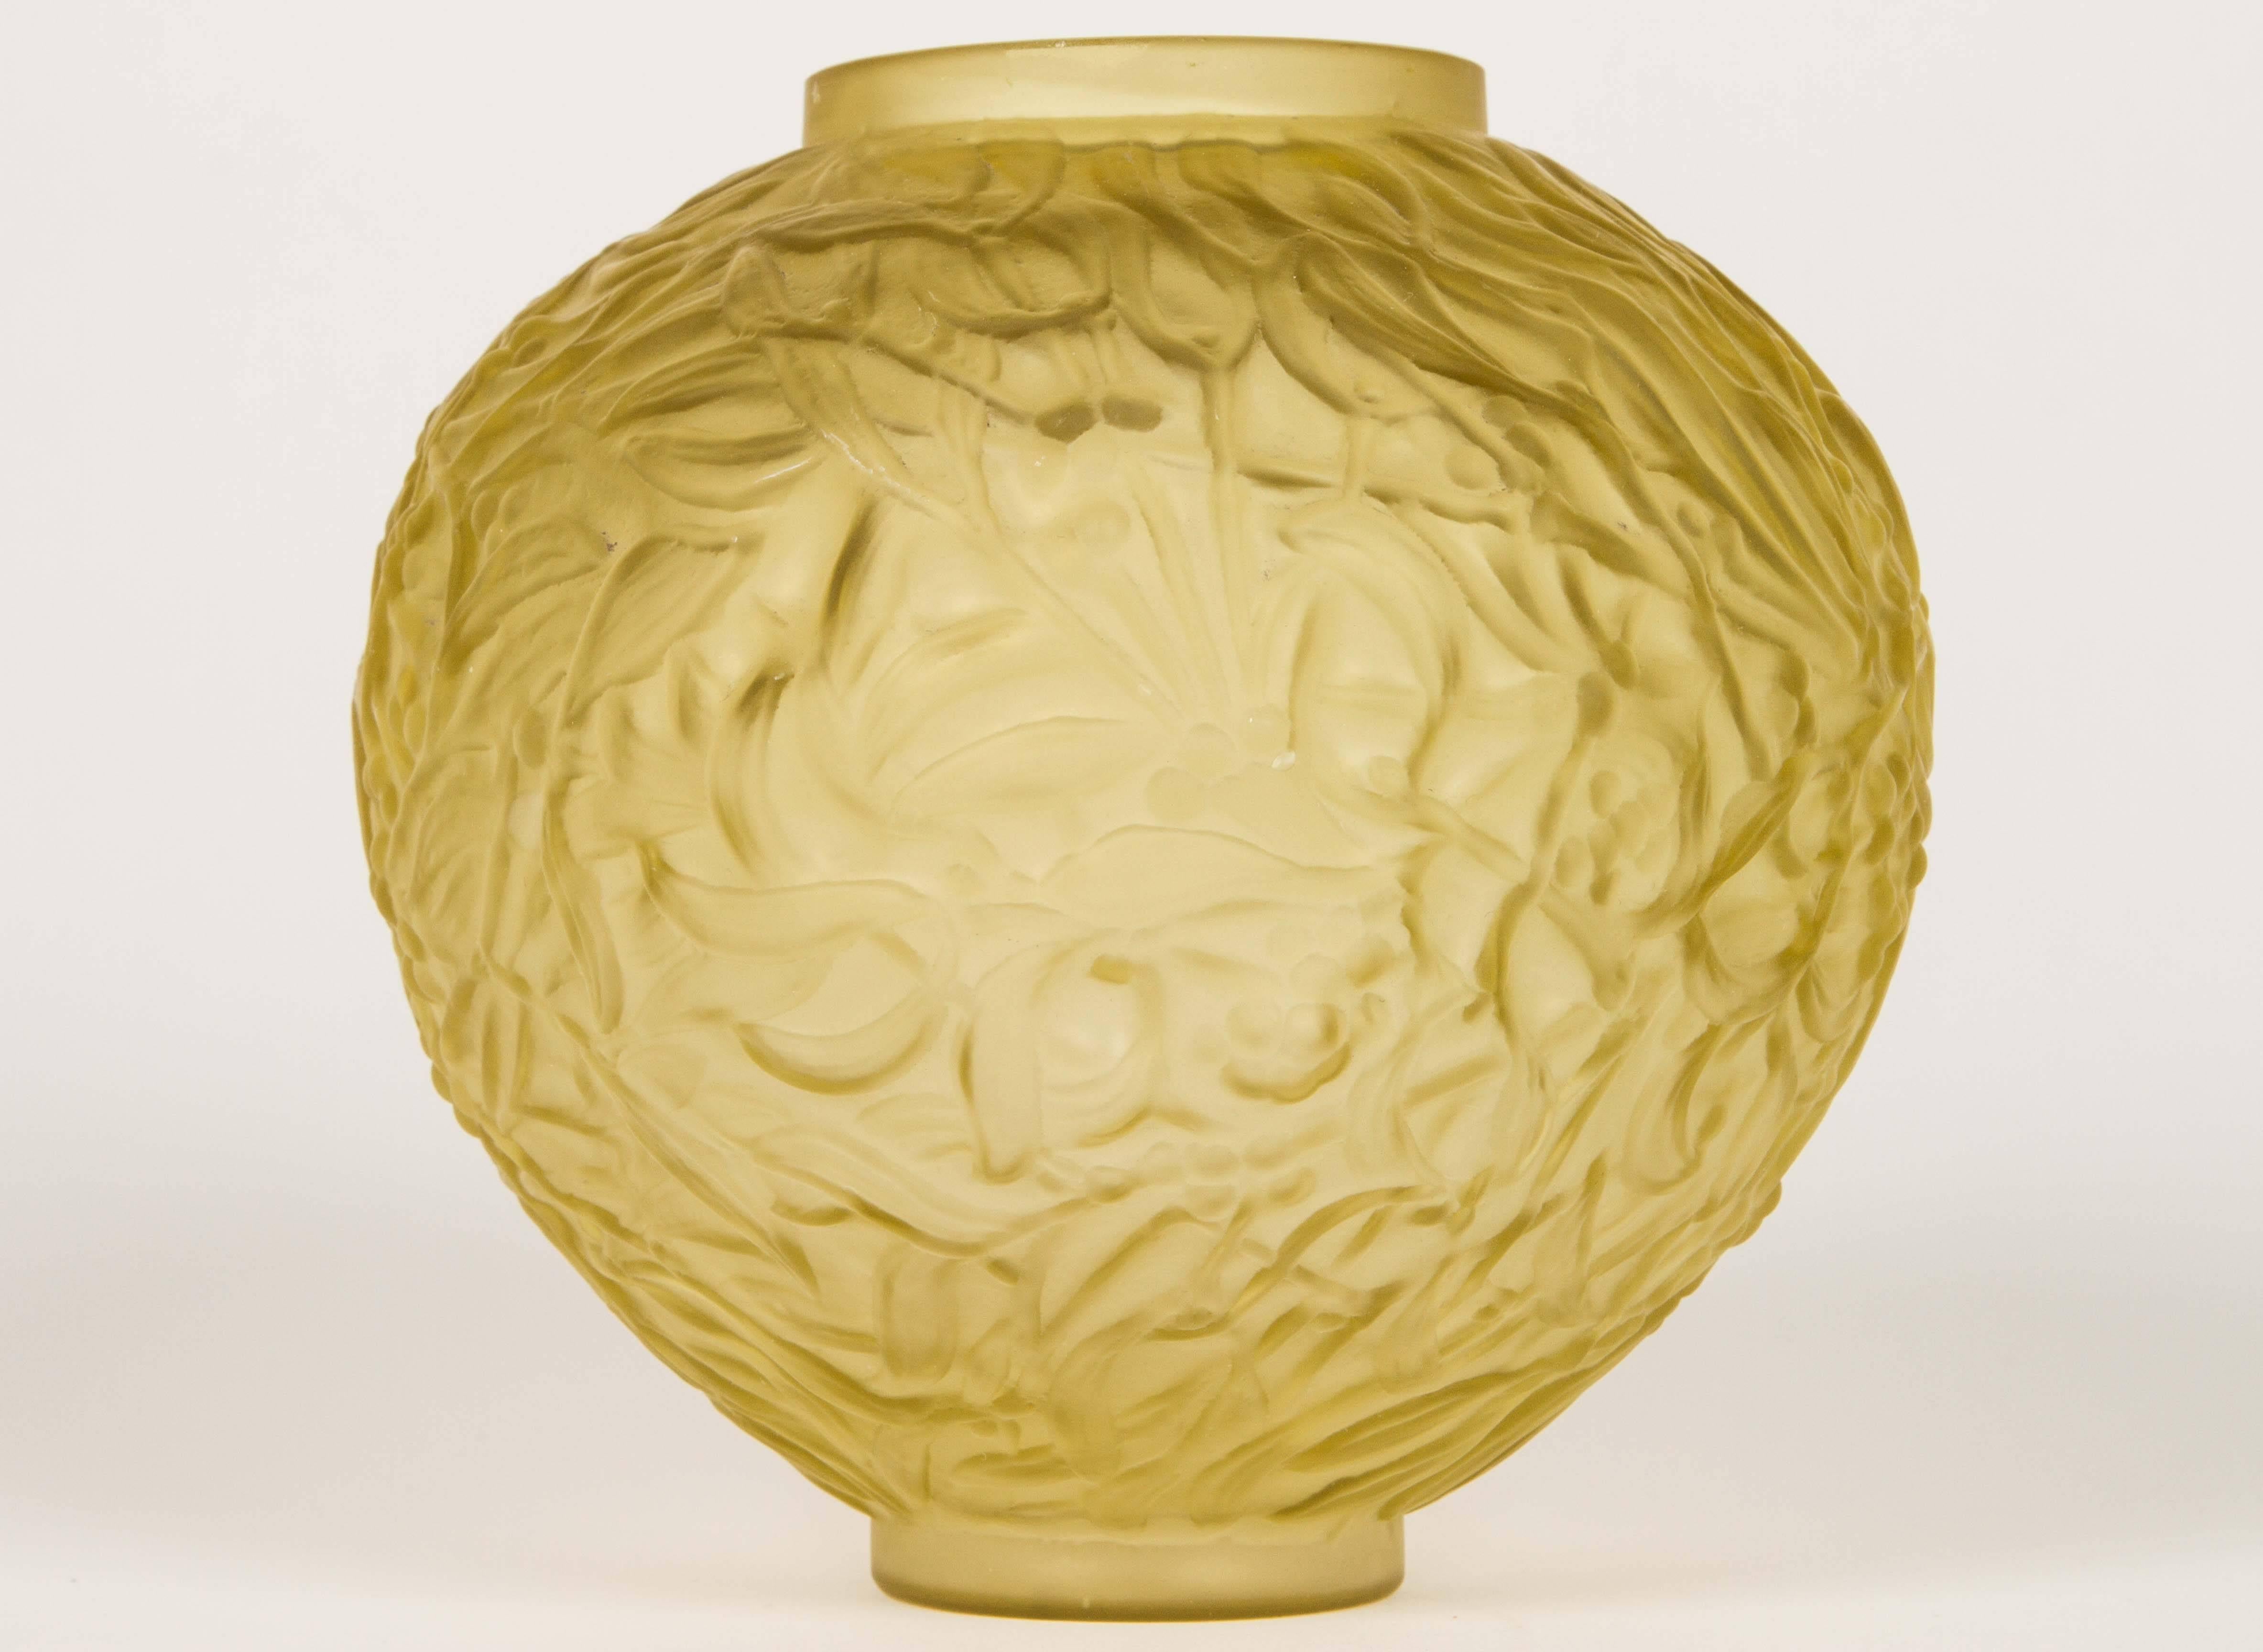 The 'Gui' vase by René Lalique. Elegant round glass vase with relief motif of leaves and berries of the mistletoe, on a satin base with engraved signature underneath: 